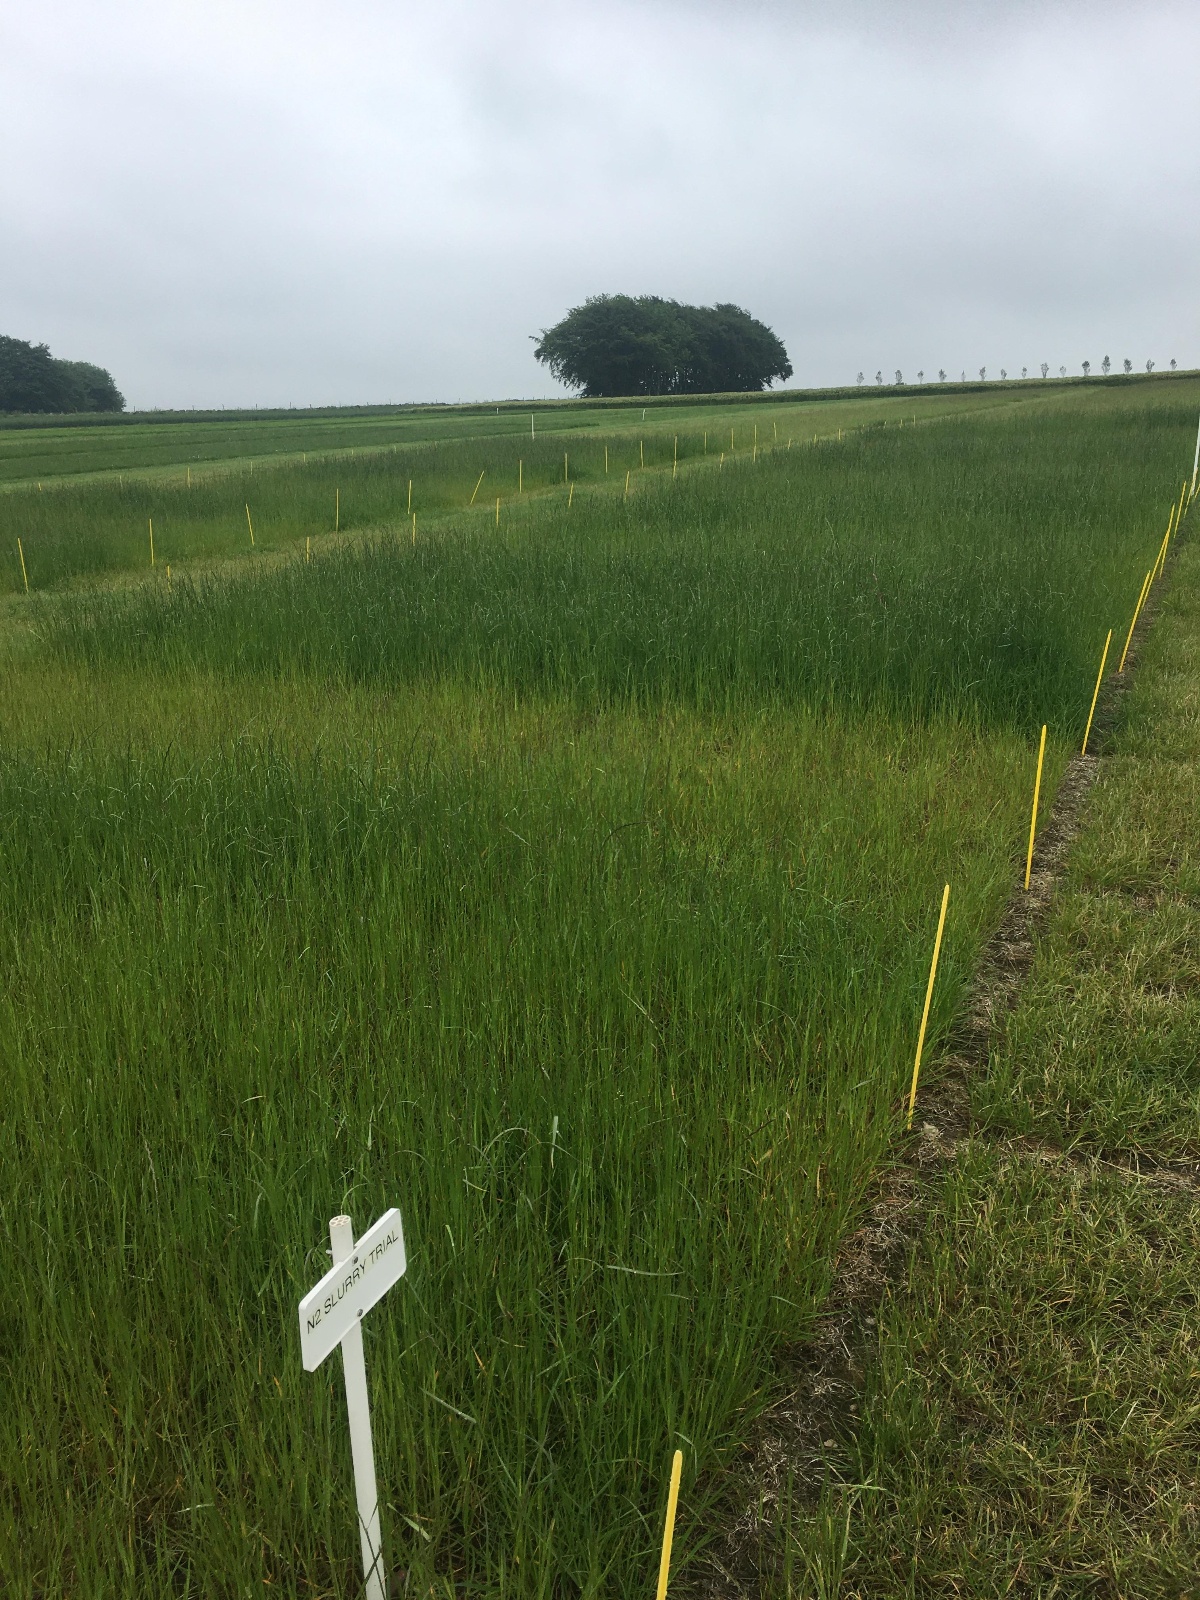 locked, randomised and replicated field plot trial carried out on grass by SRUC, 2020.